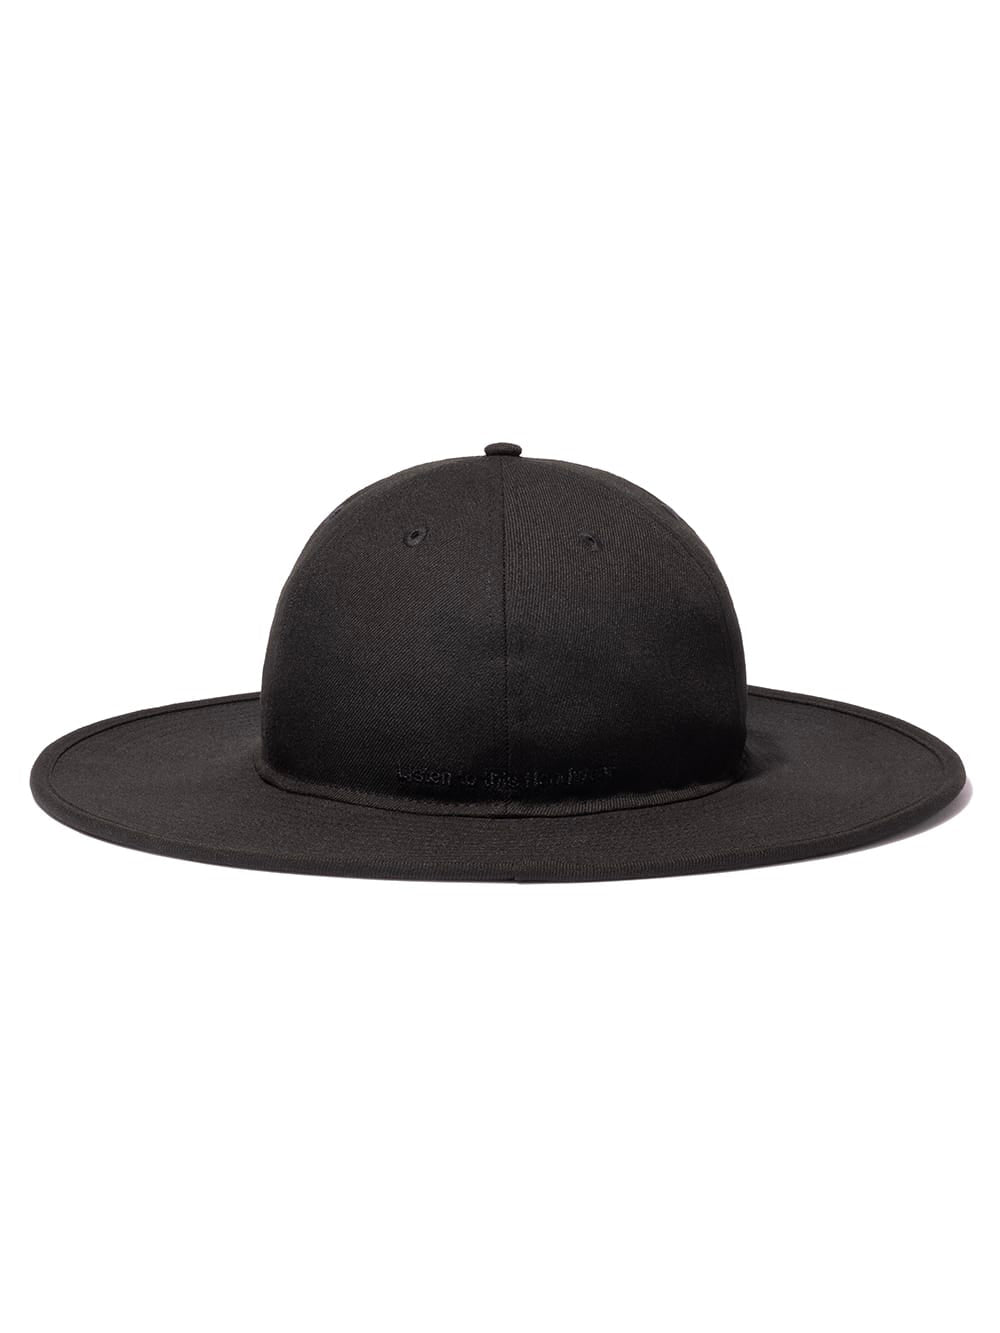 Fitted Long Brim Hat.(I AM THE SOLOIST.)